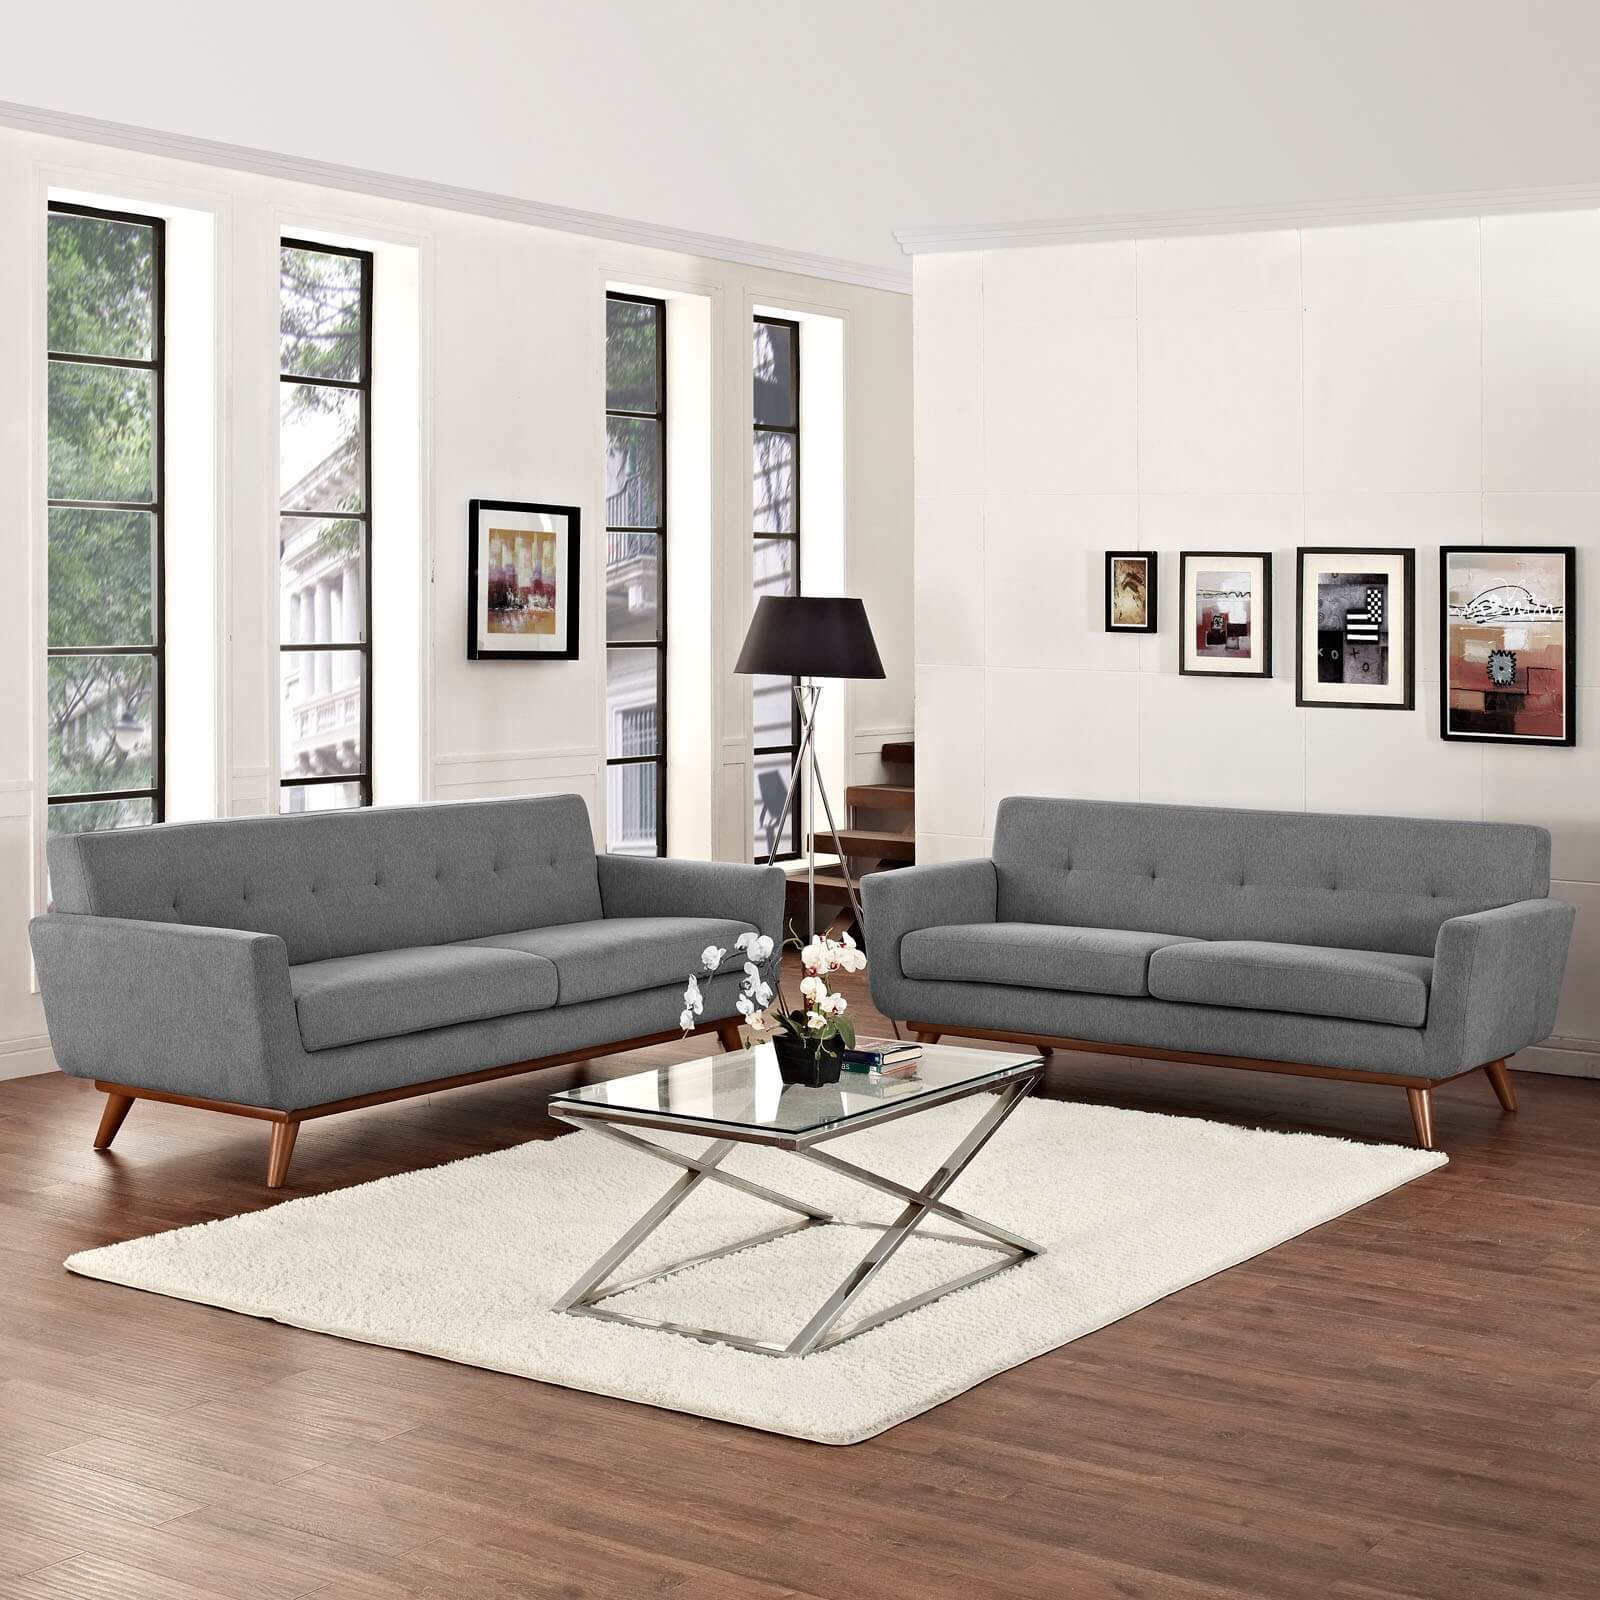 Engage Living Room Set (Expectation Gray) - All American Furniture ...